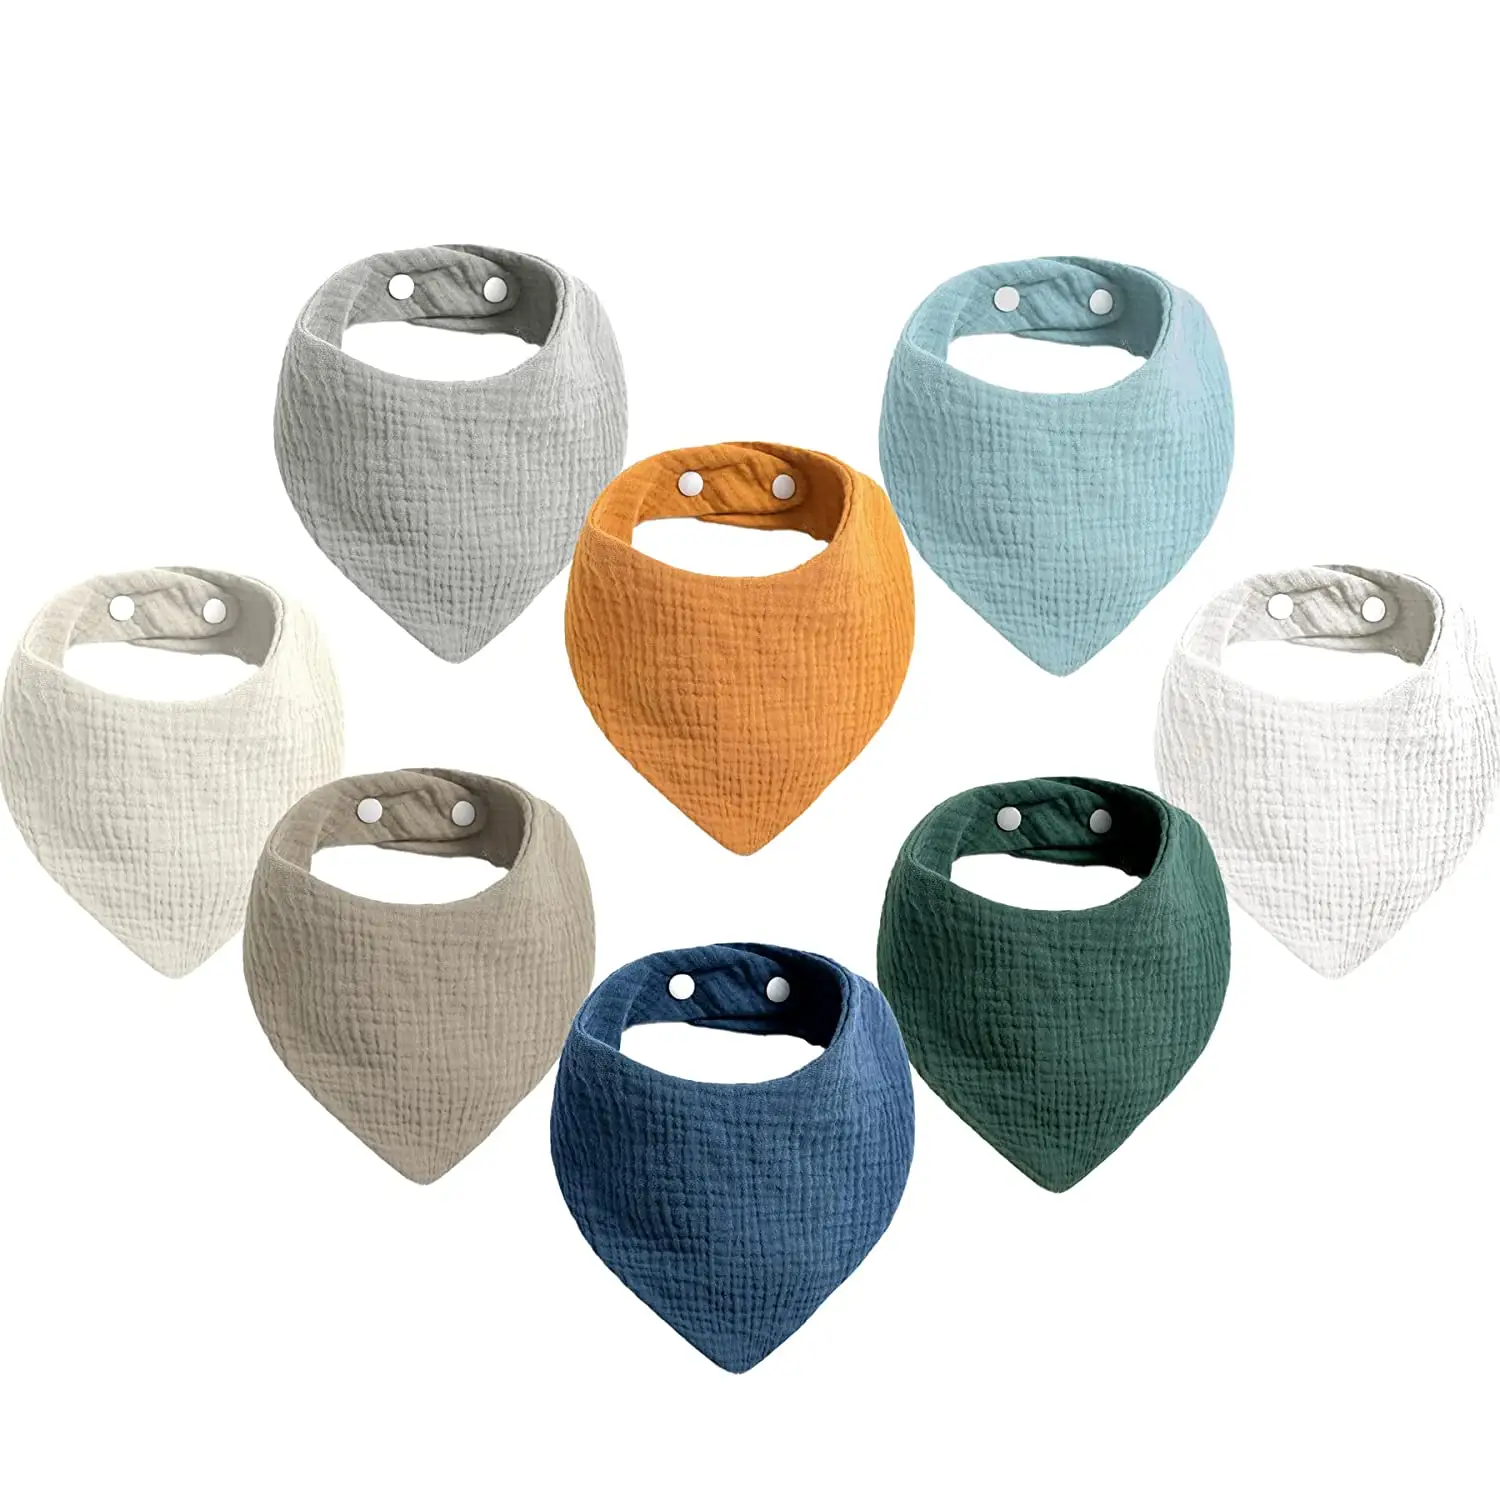 100% Cotton Muslin Soft Newborn Bibs Plain Colors for Boys OEM Service Waterproof Bibs Printed Baby Rice Pocket Clothing Support